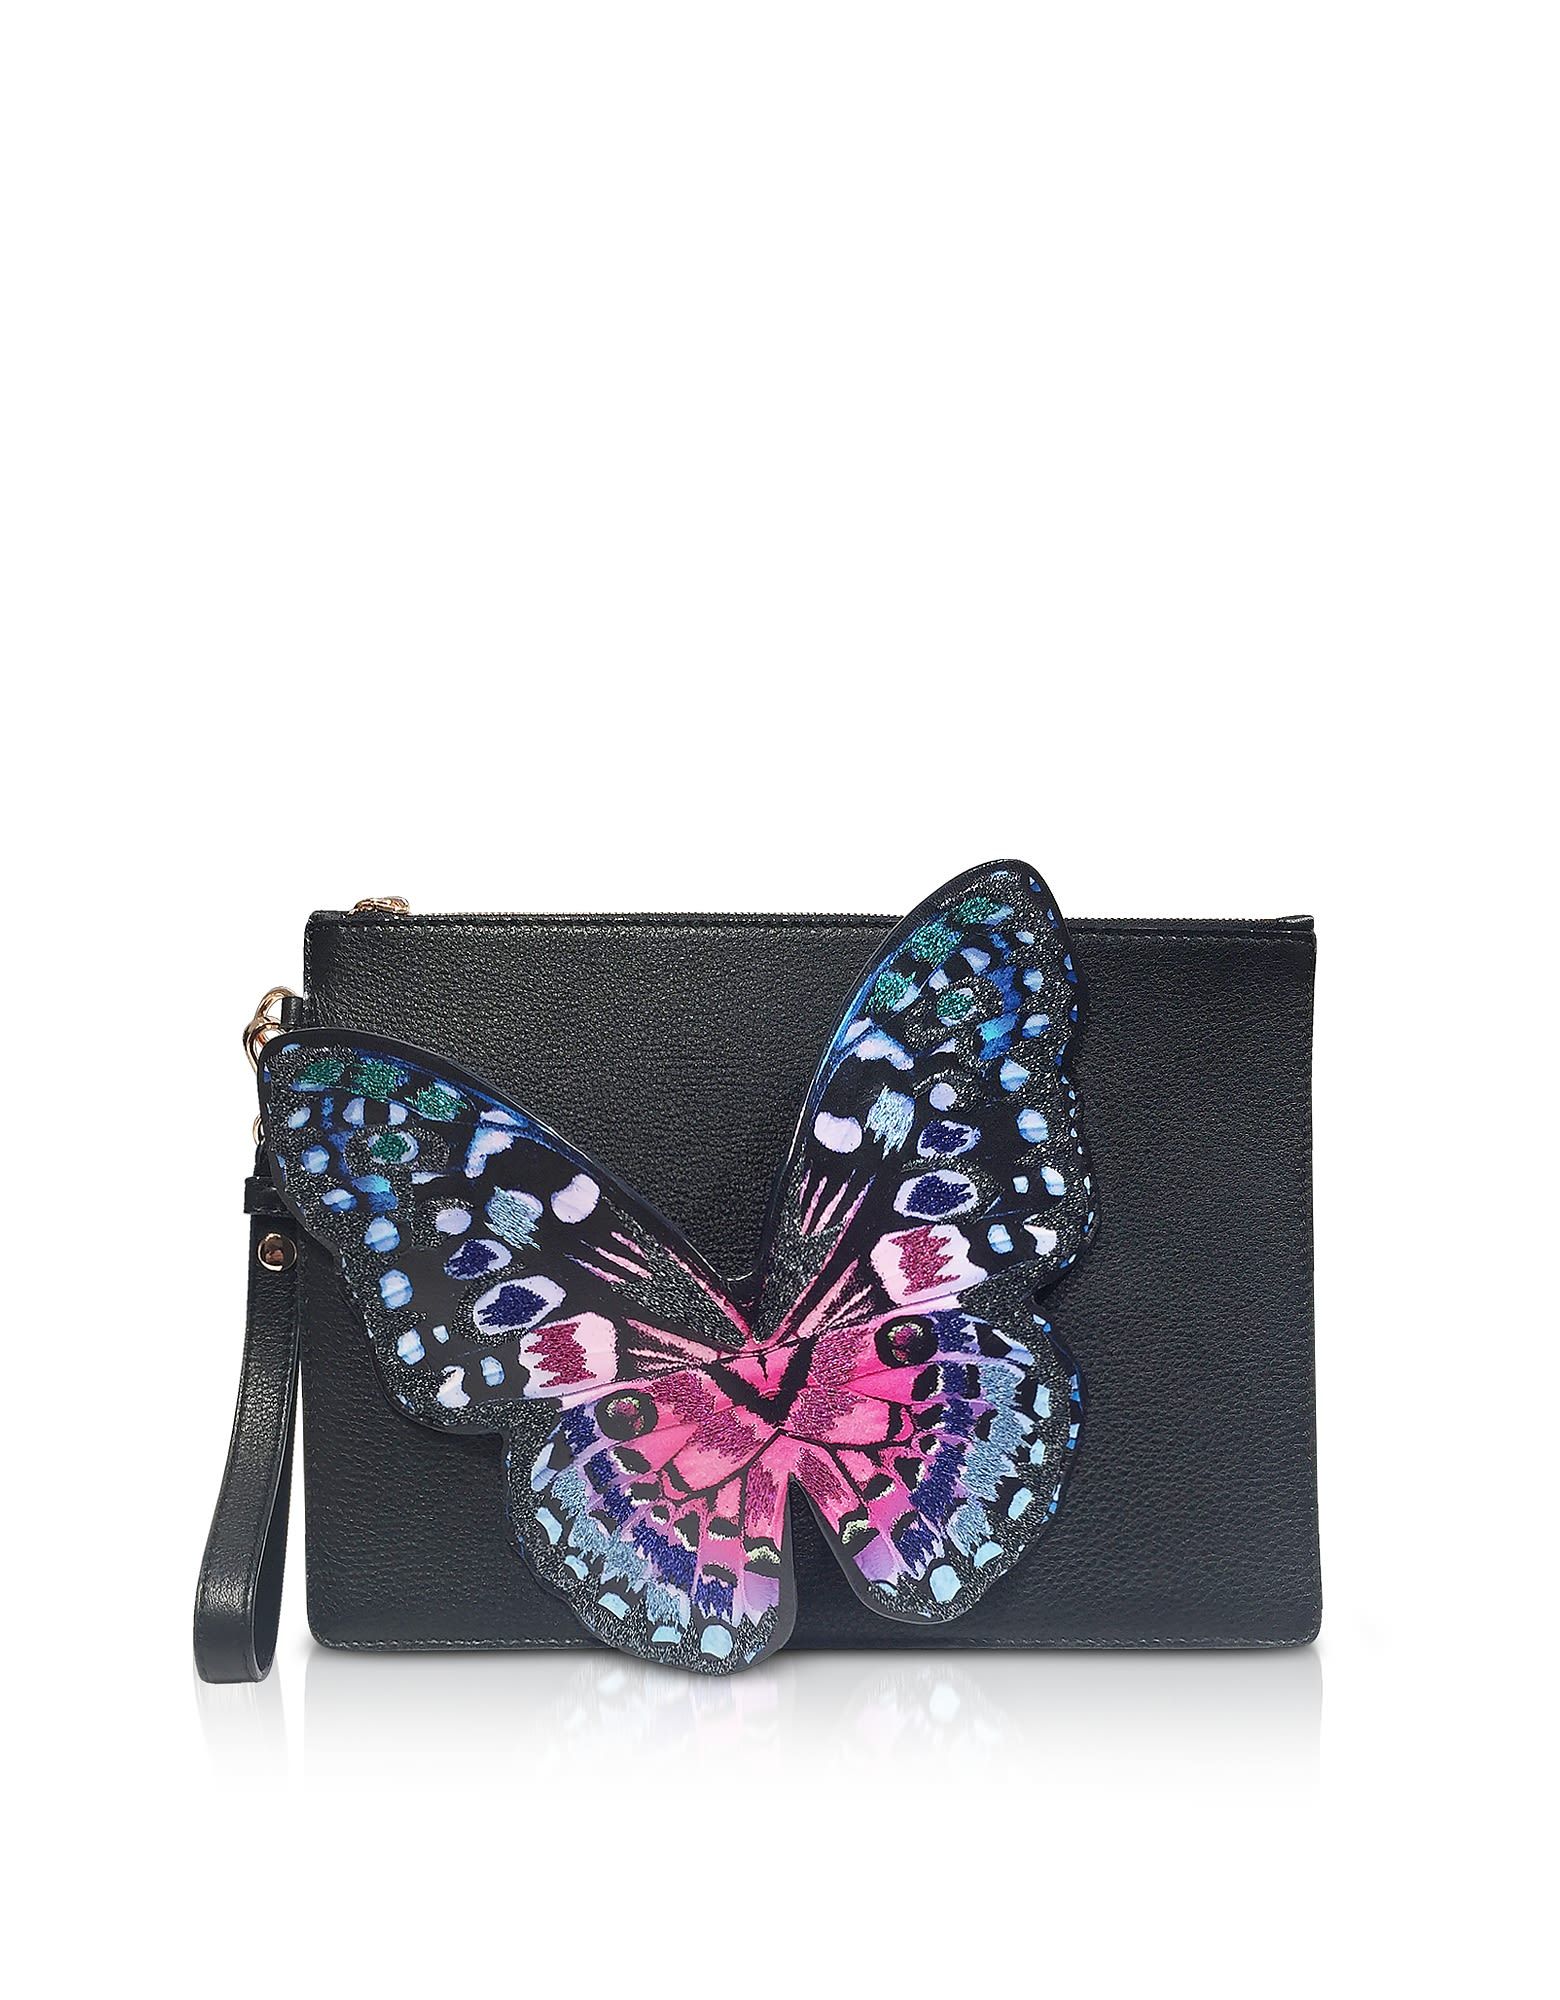 Sophia Webster Black Flossy Embroidered Butterfly Pouchette | Italist.com US